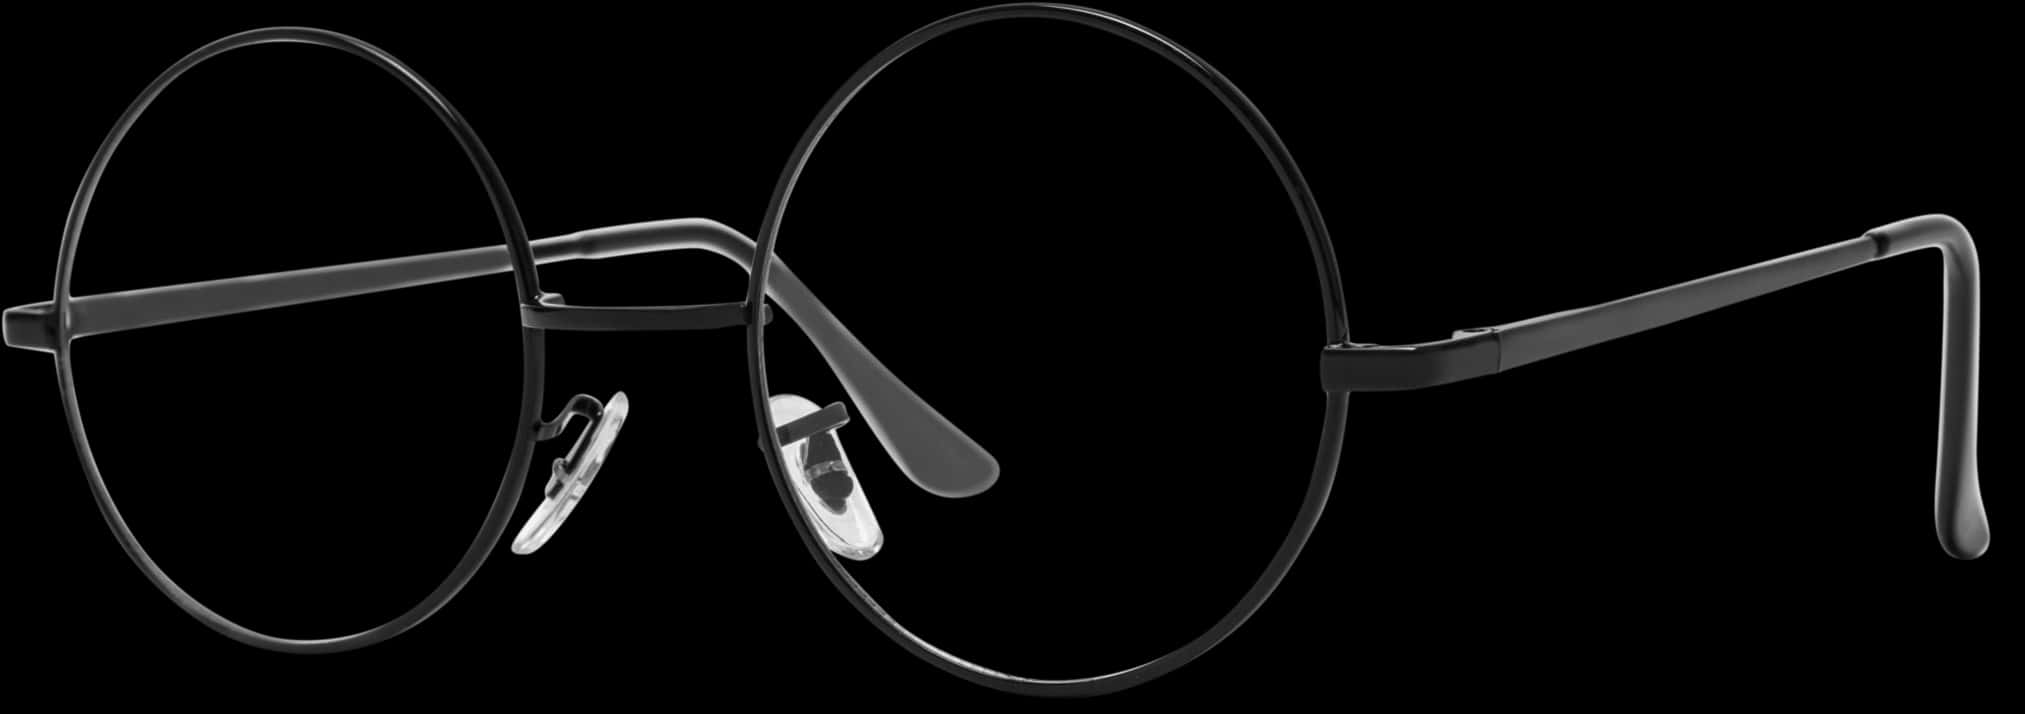 Black Round Glasses Isolated PNG image